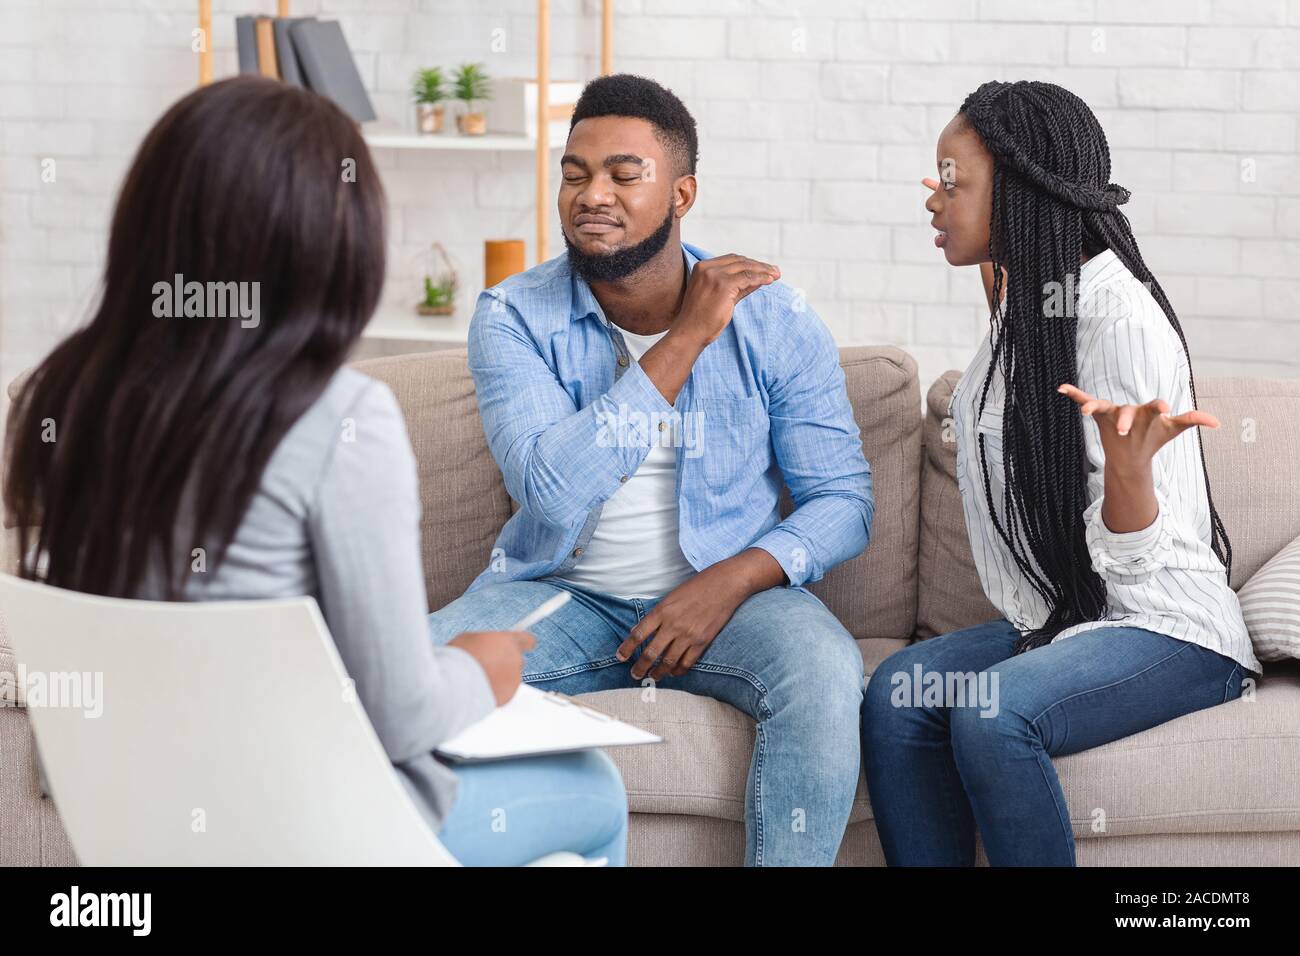 Black Couple Arguing During Marriage And Family Therapy Counselling Session Stock Photo